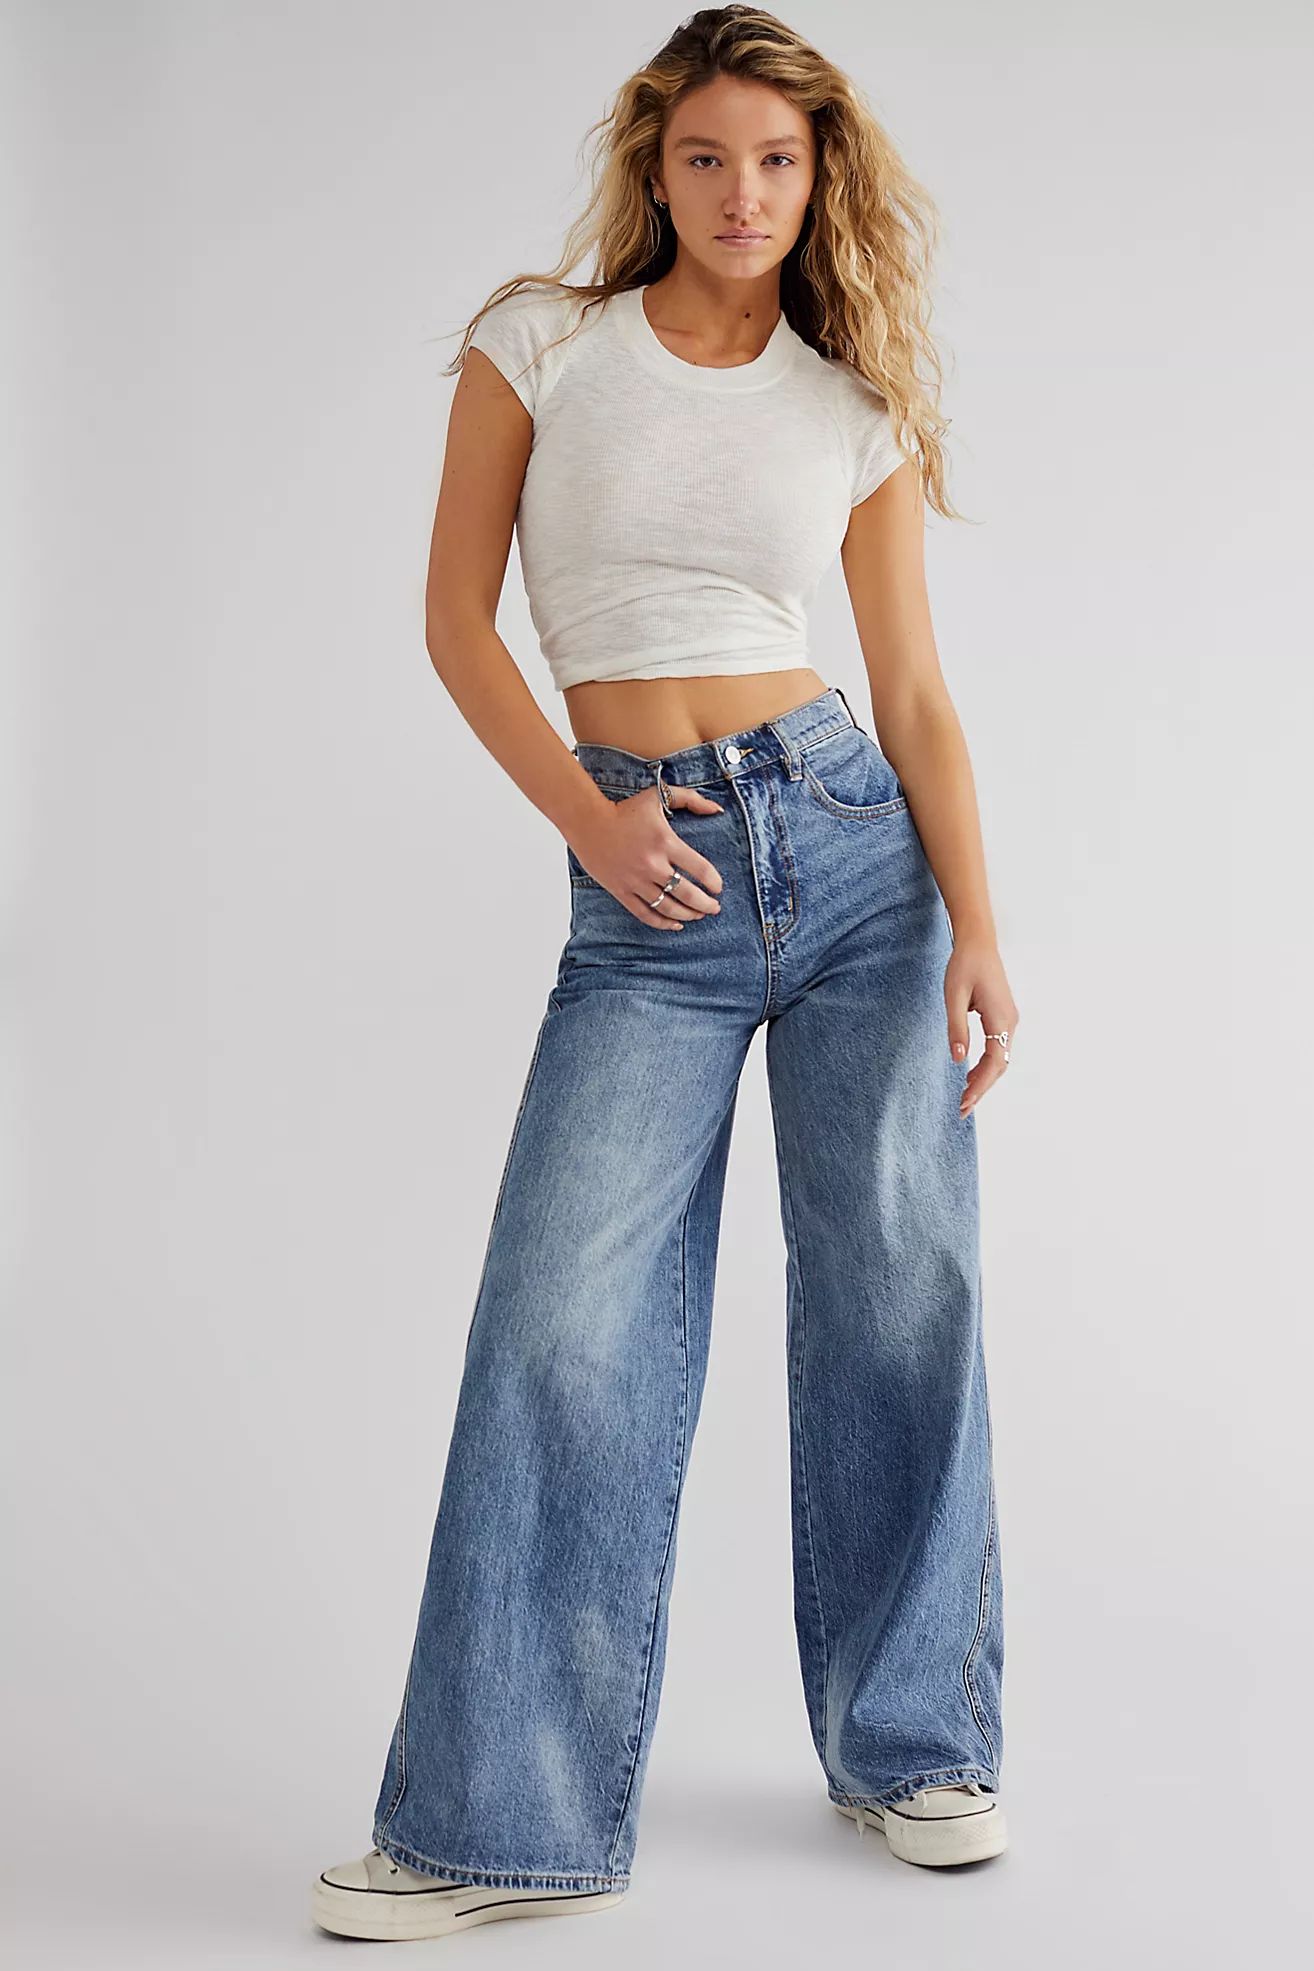 CRVY Gia Wide-Leg Jeans | Free People (UK)